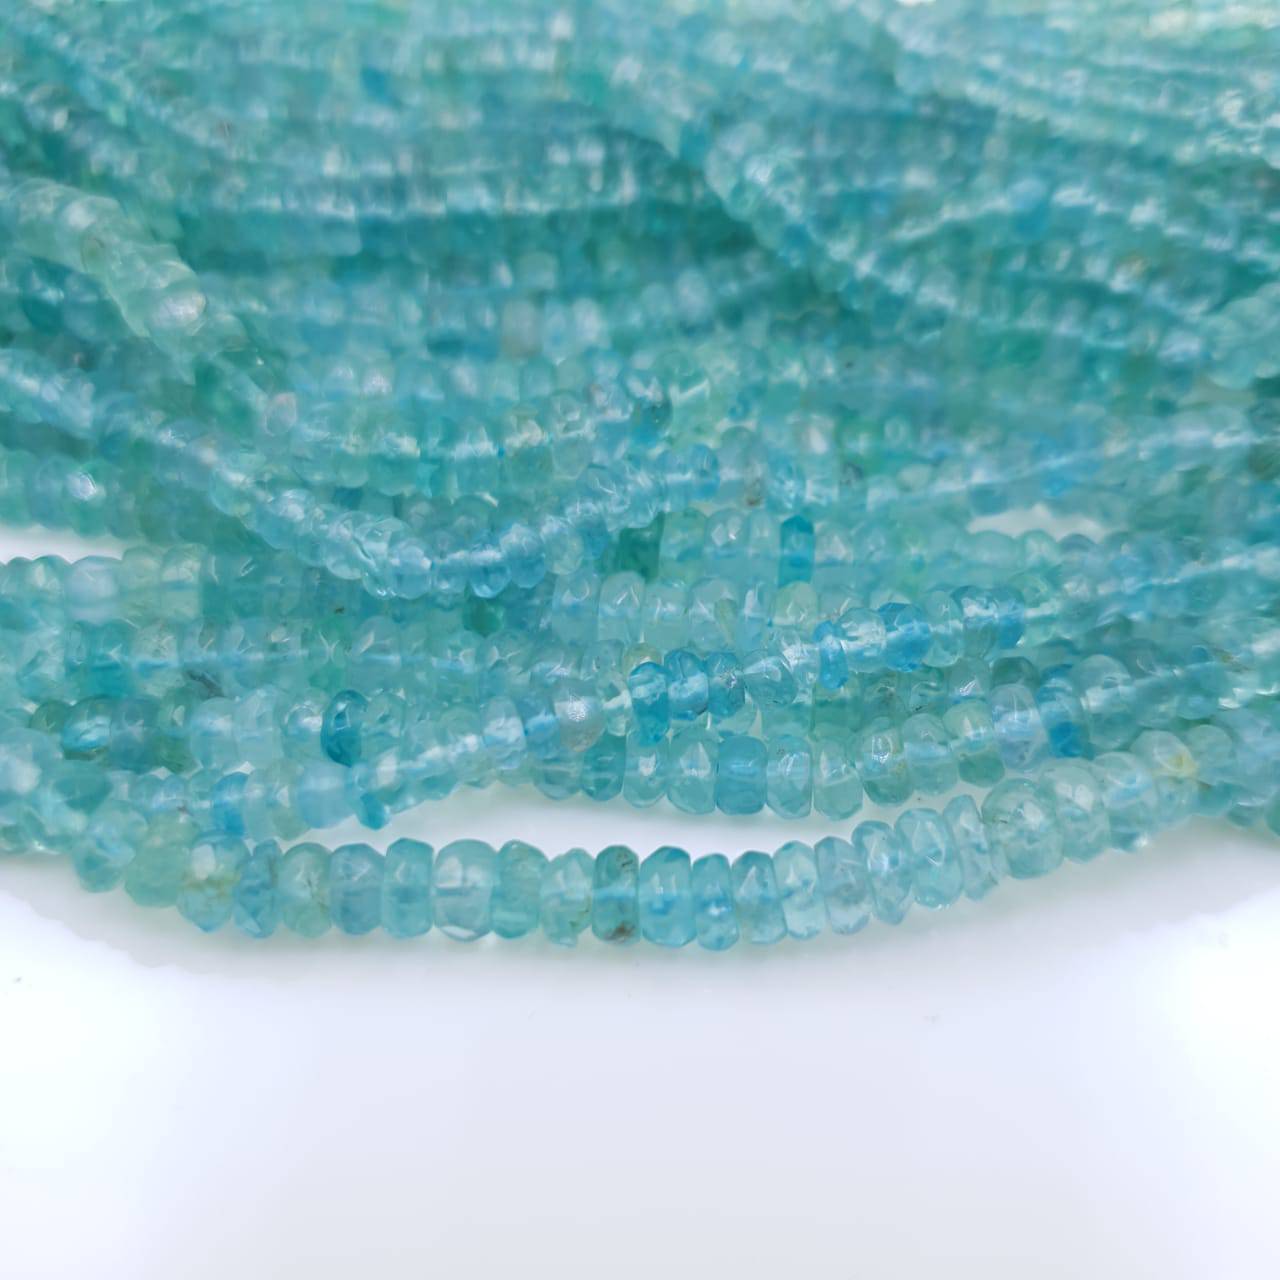 Natural Untreated Appetite Beads 3.5mm | Faceted | 9" Inches - The LabradoriteKing